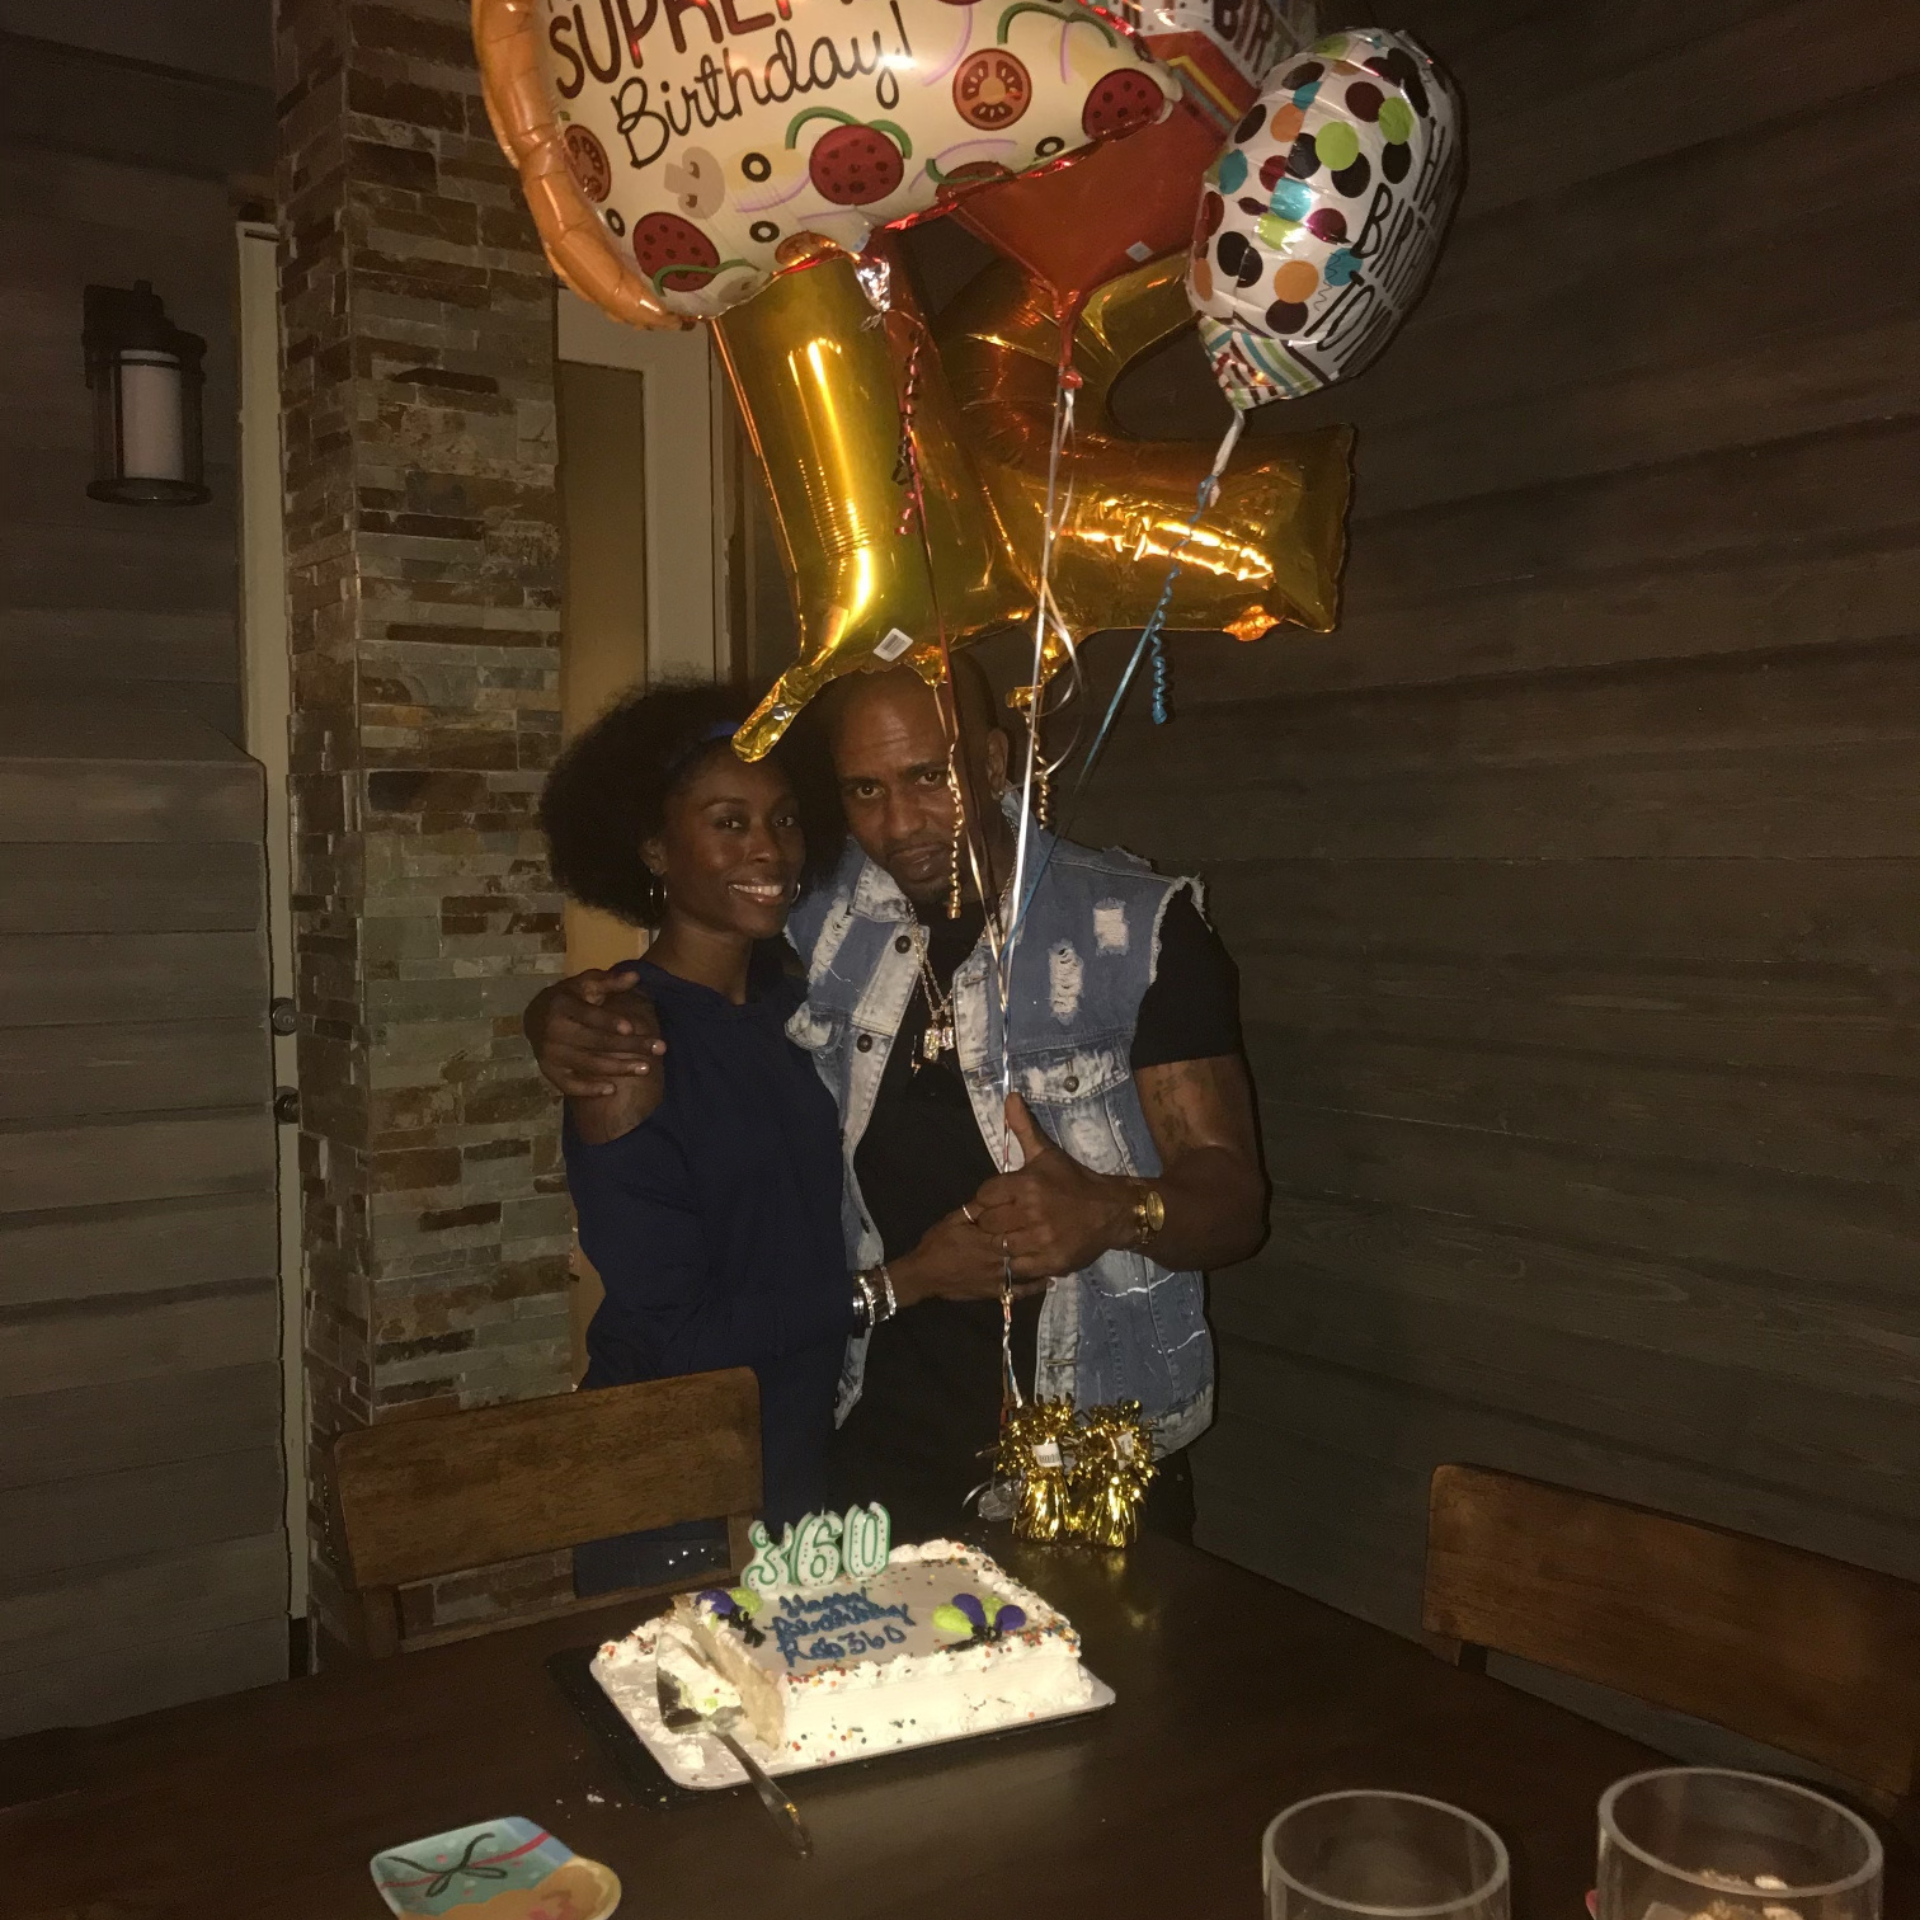 Robert & Tasha Alexander at "MC Hammers" ranch in California for surprise private Birthday party - 360WiSE